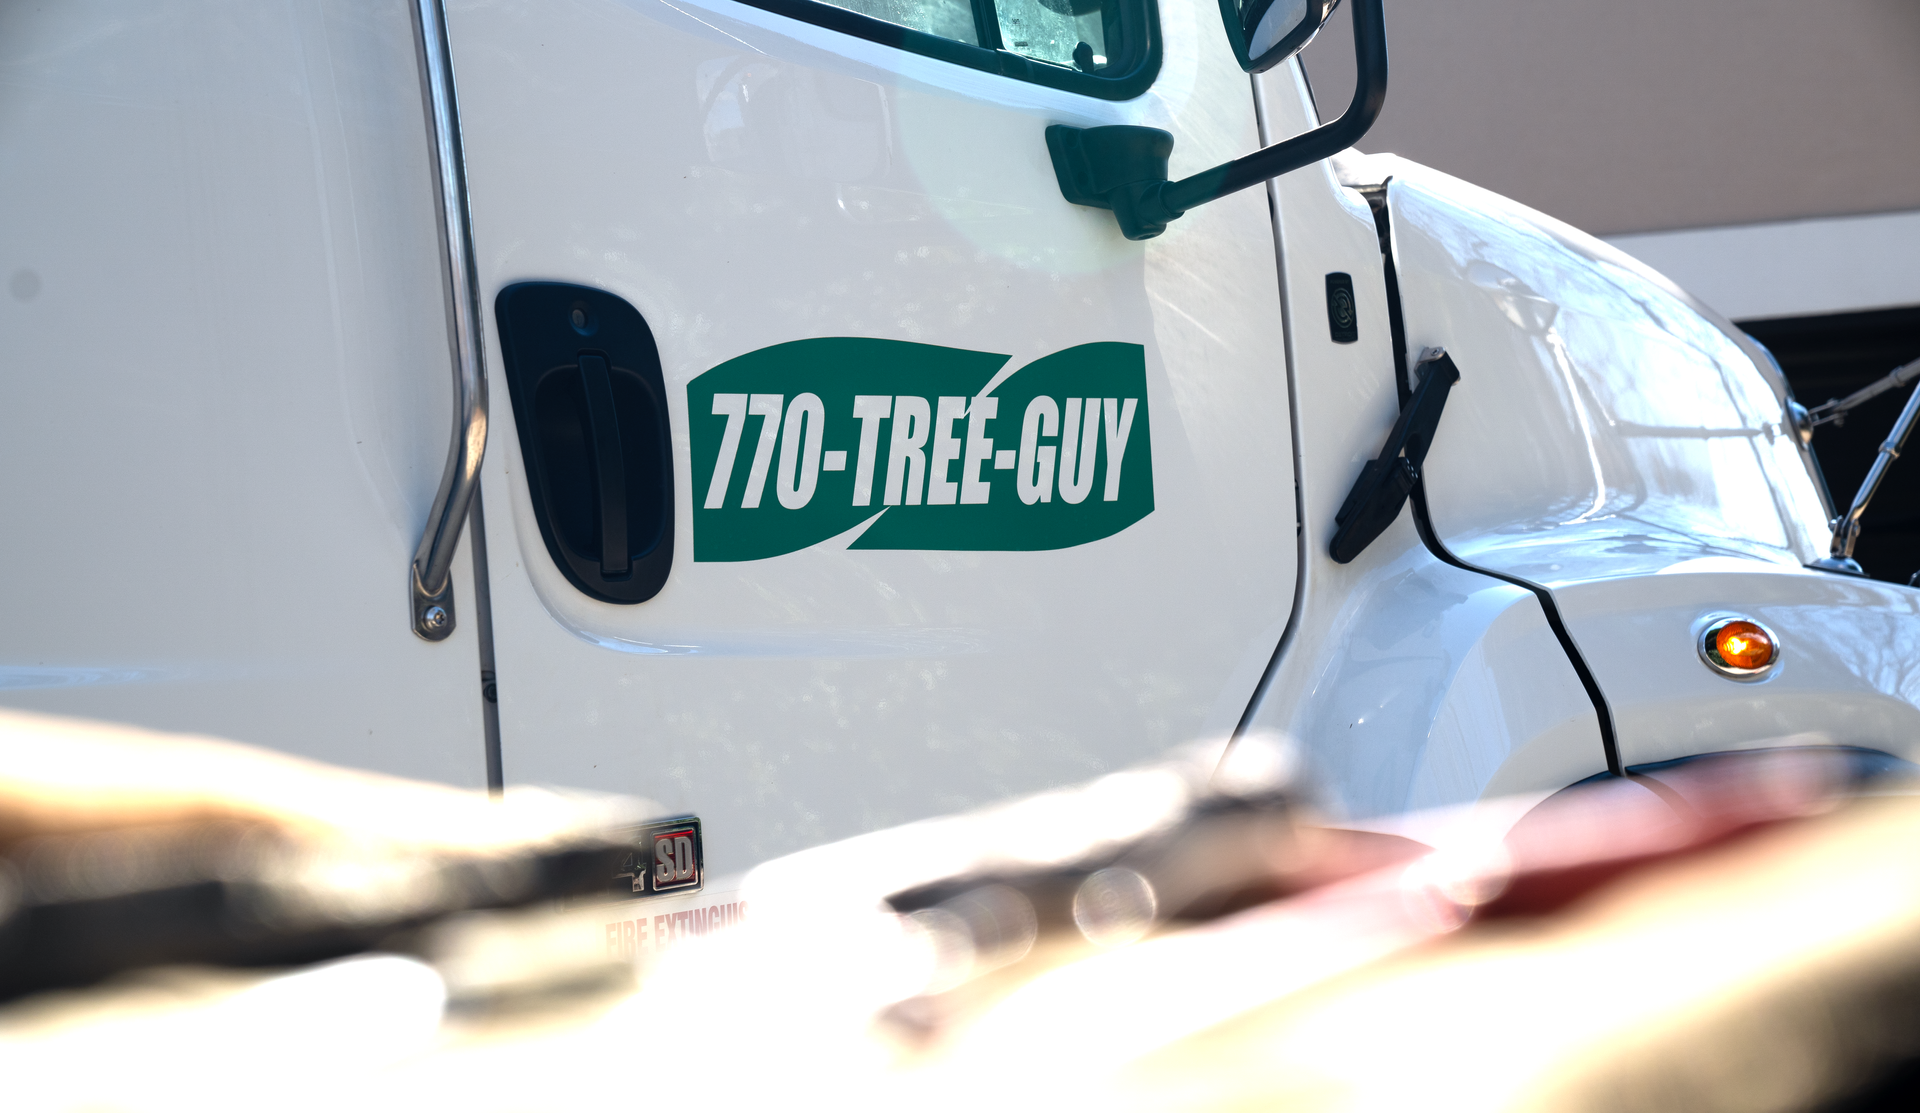 a white truck that says 770-tree-guy on the side